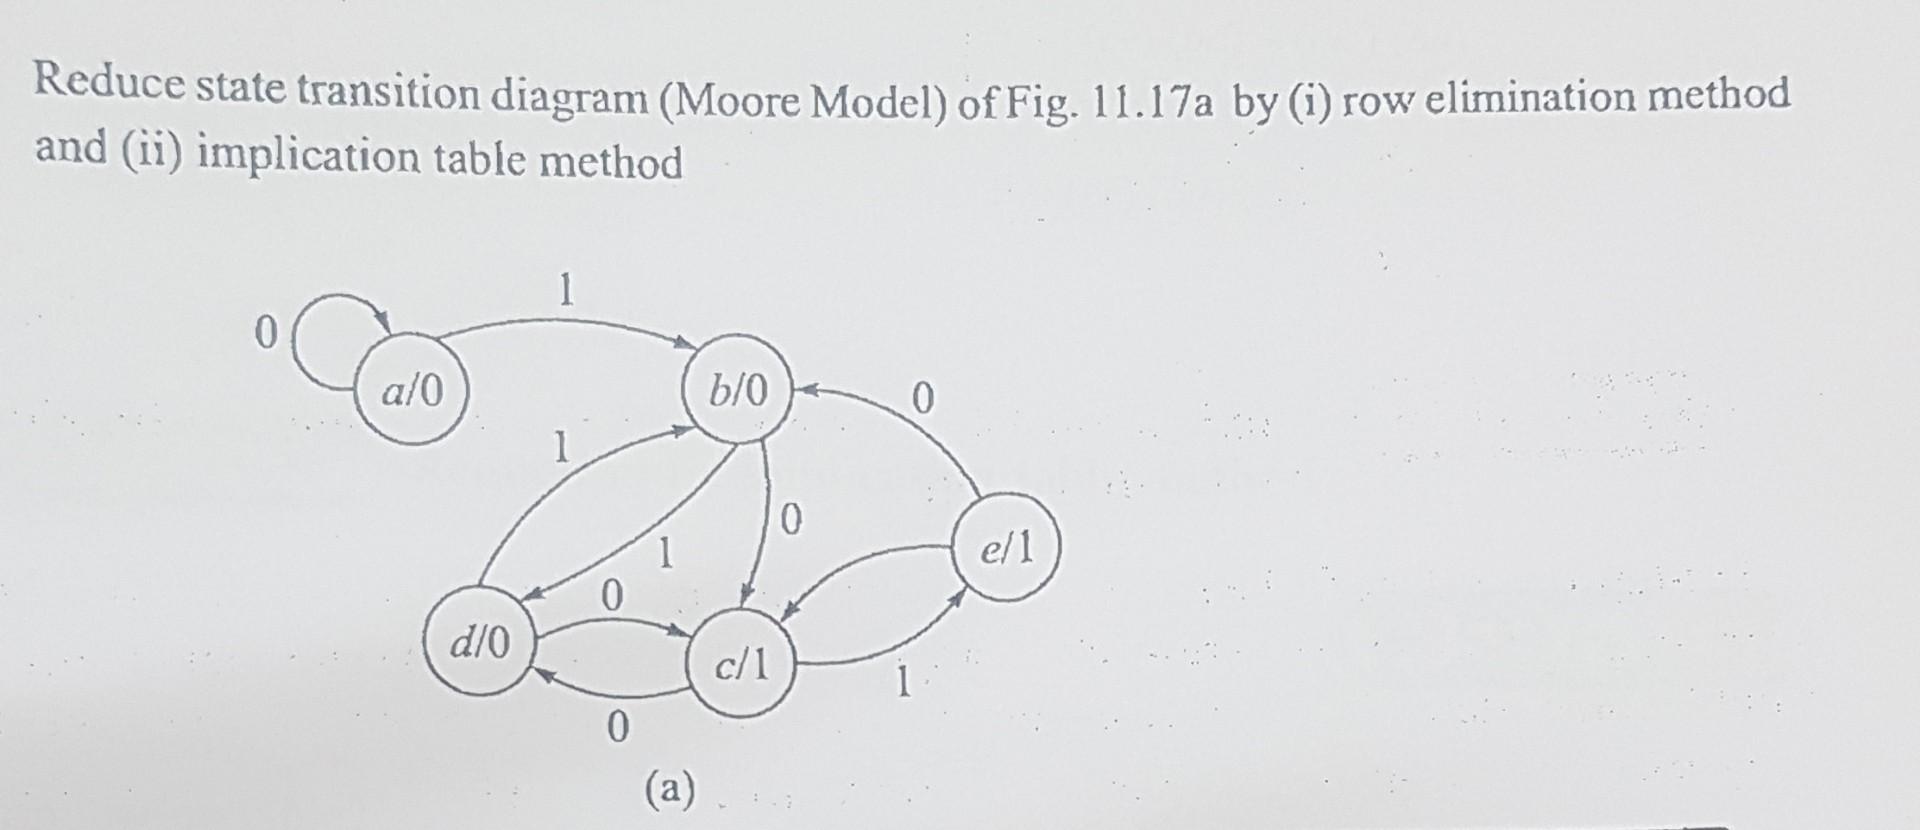 Reduce state transition diagram (Moore Model) of Fig. 11.17a by (i) row elimination method and (ii) implication table method